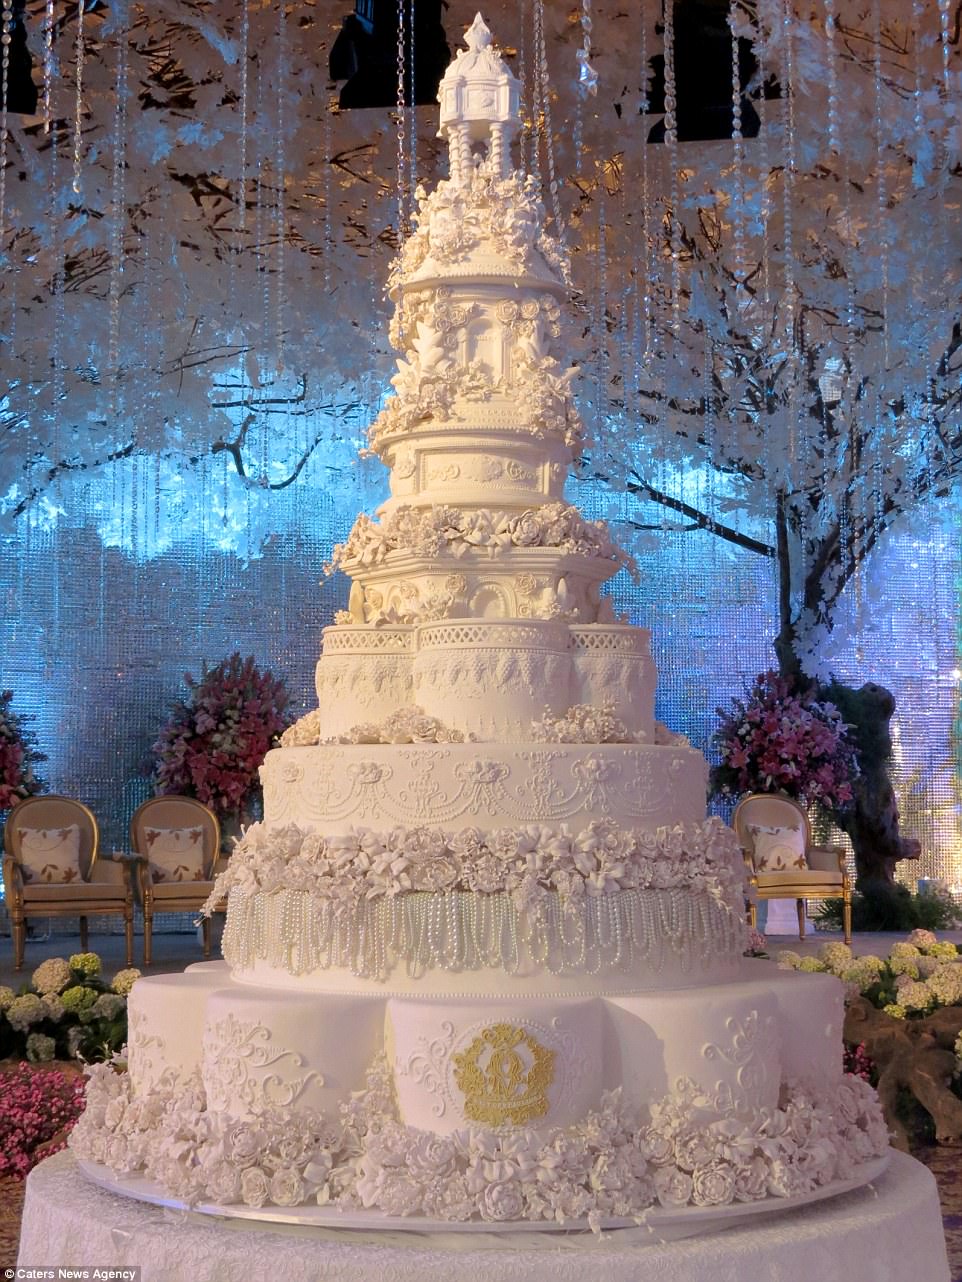 For Le Novelle Cake, this bake is almost simple but it still features an incredible amount of decoration and detail. Stcking to a predominantly white theme, the bakers have decorated the second tier with strings of pearls